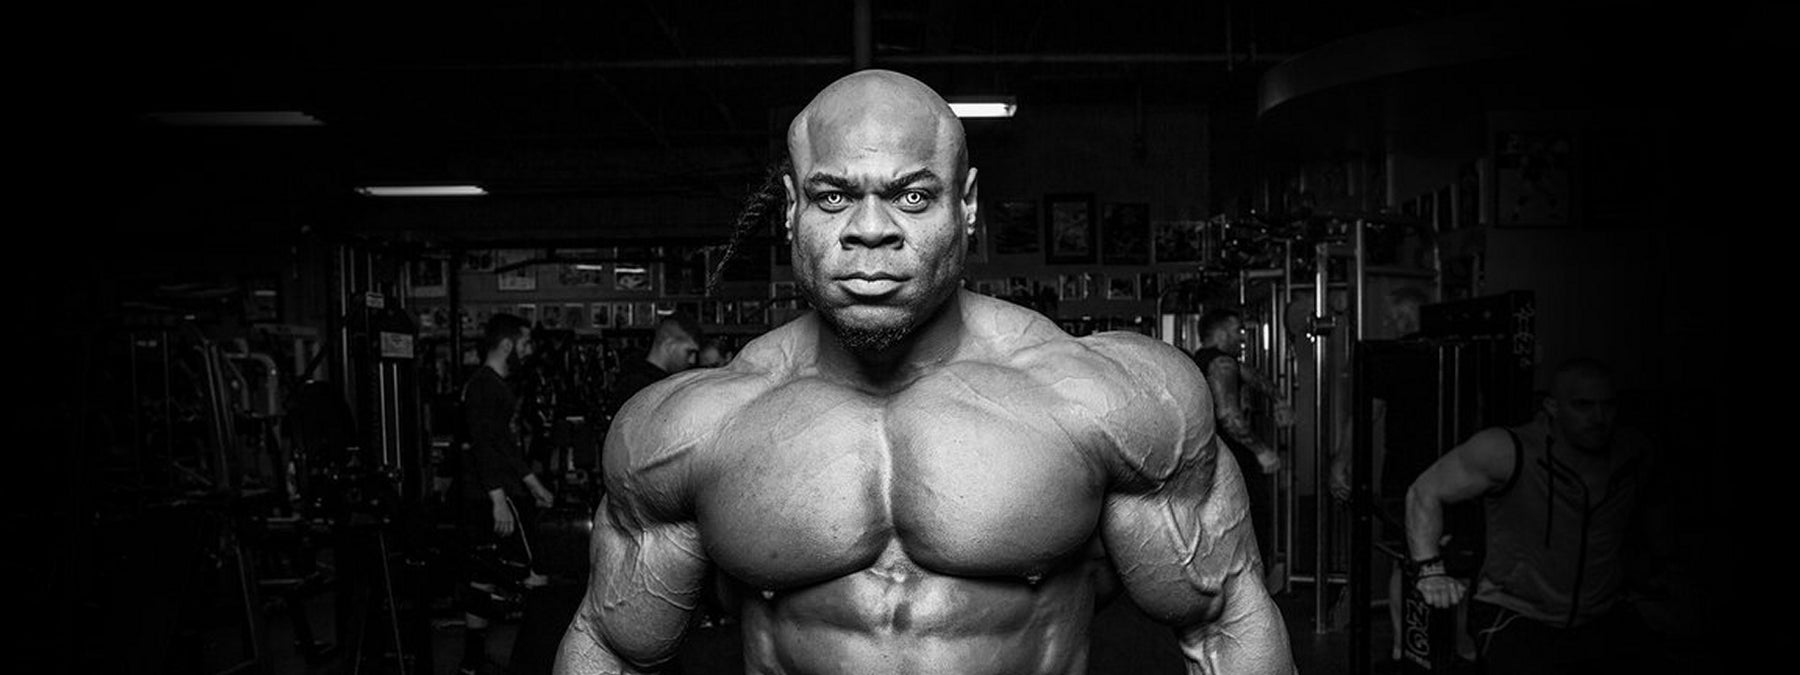 EXCLUSIVE! Bodybuilder Kai Greene Will Compete at the 2016 Arnold Classic